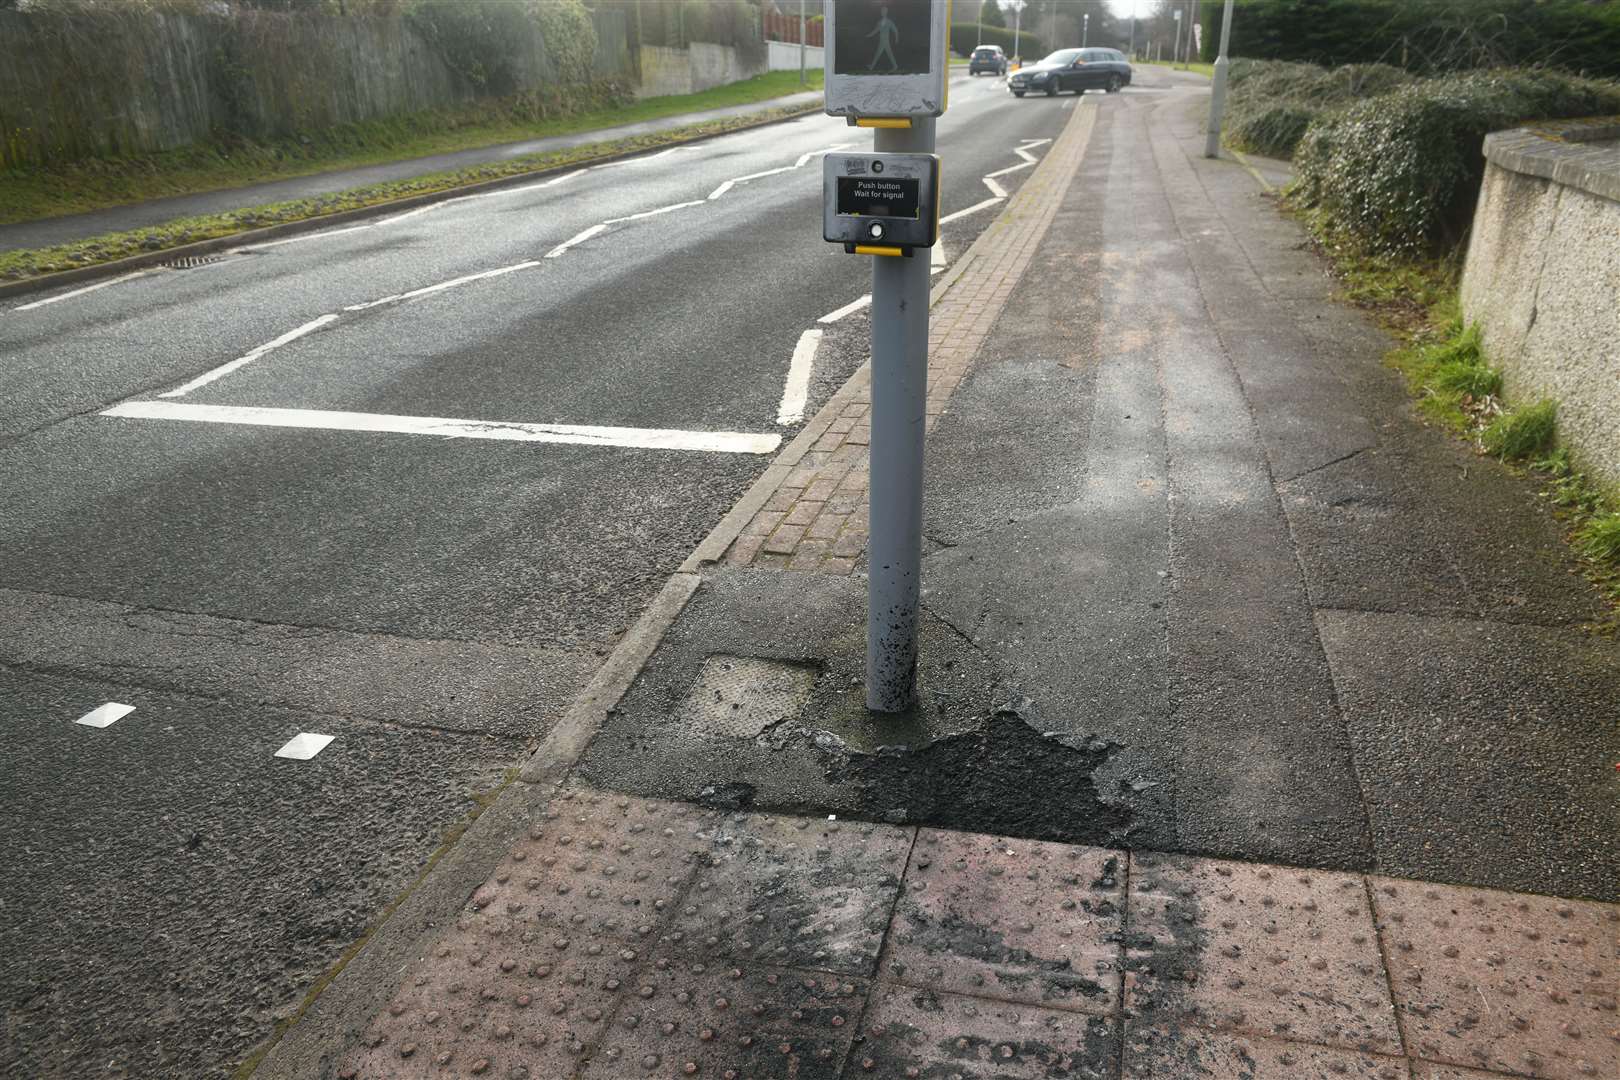 Some of the residue from the melted traffic light fascia can be seen on the ground. Picture: James Mackenzie.